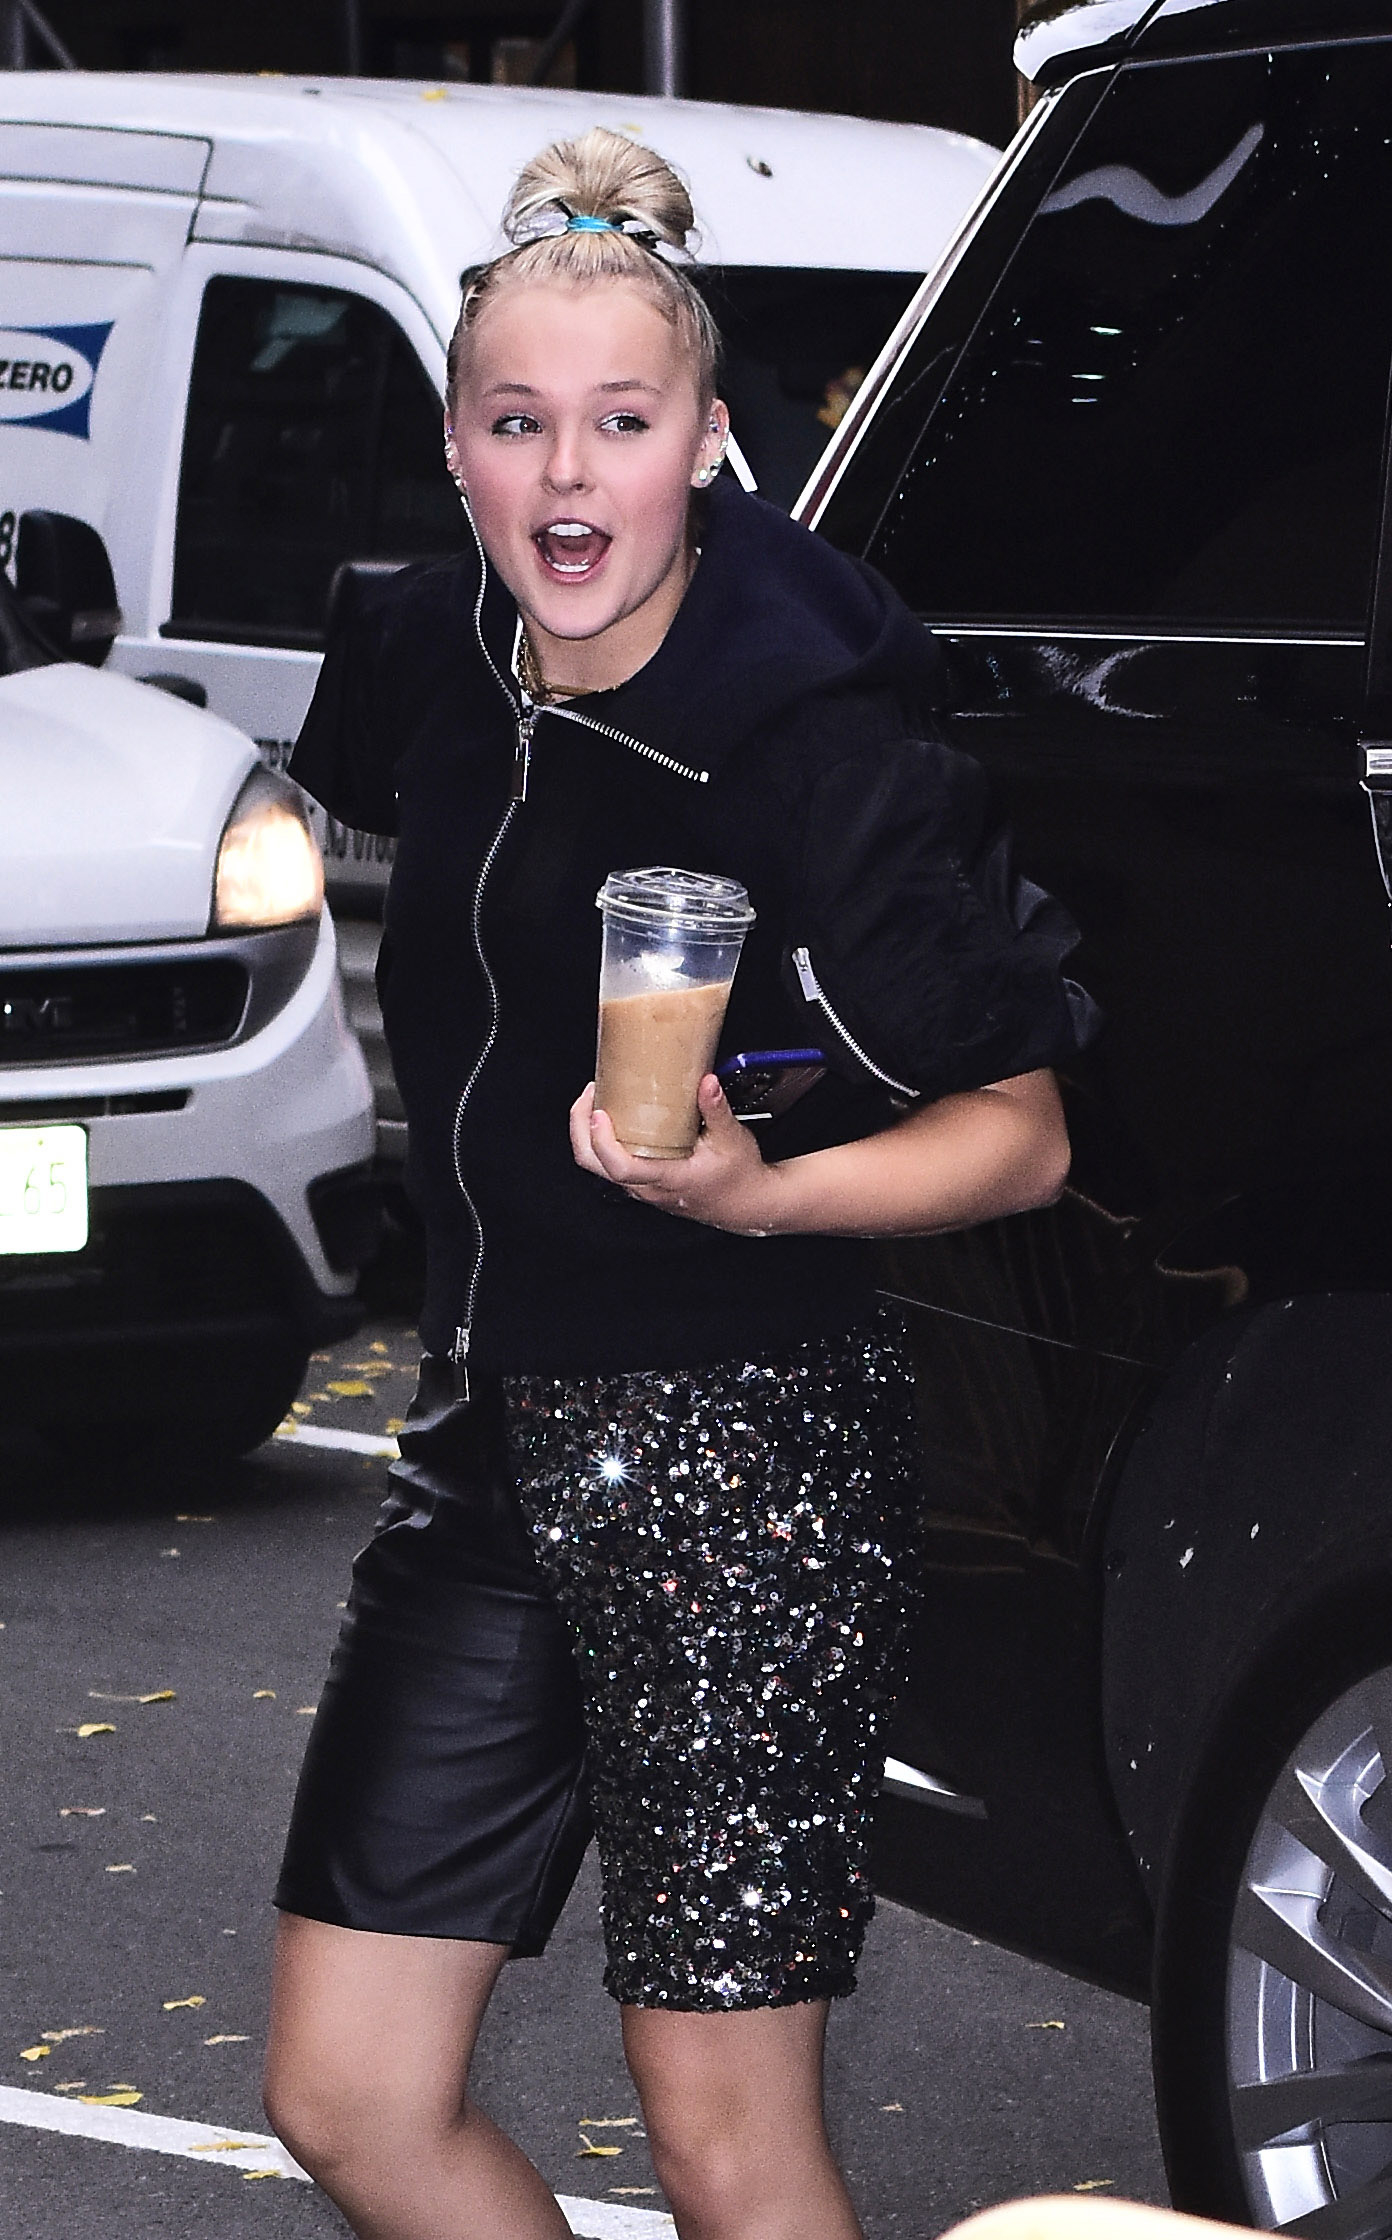 JoJo Siwa in a black jacket and sparkling skirt, exiting a vehicle with a beverage in hand